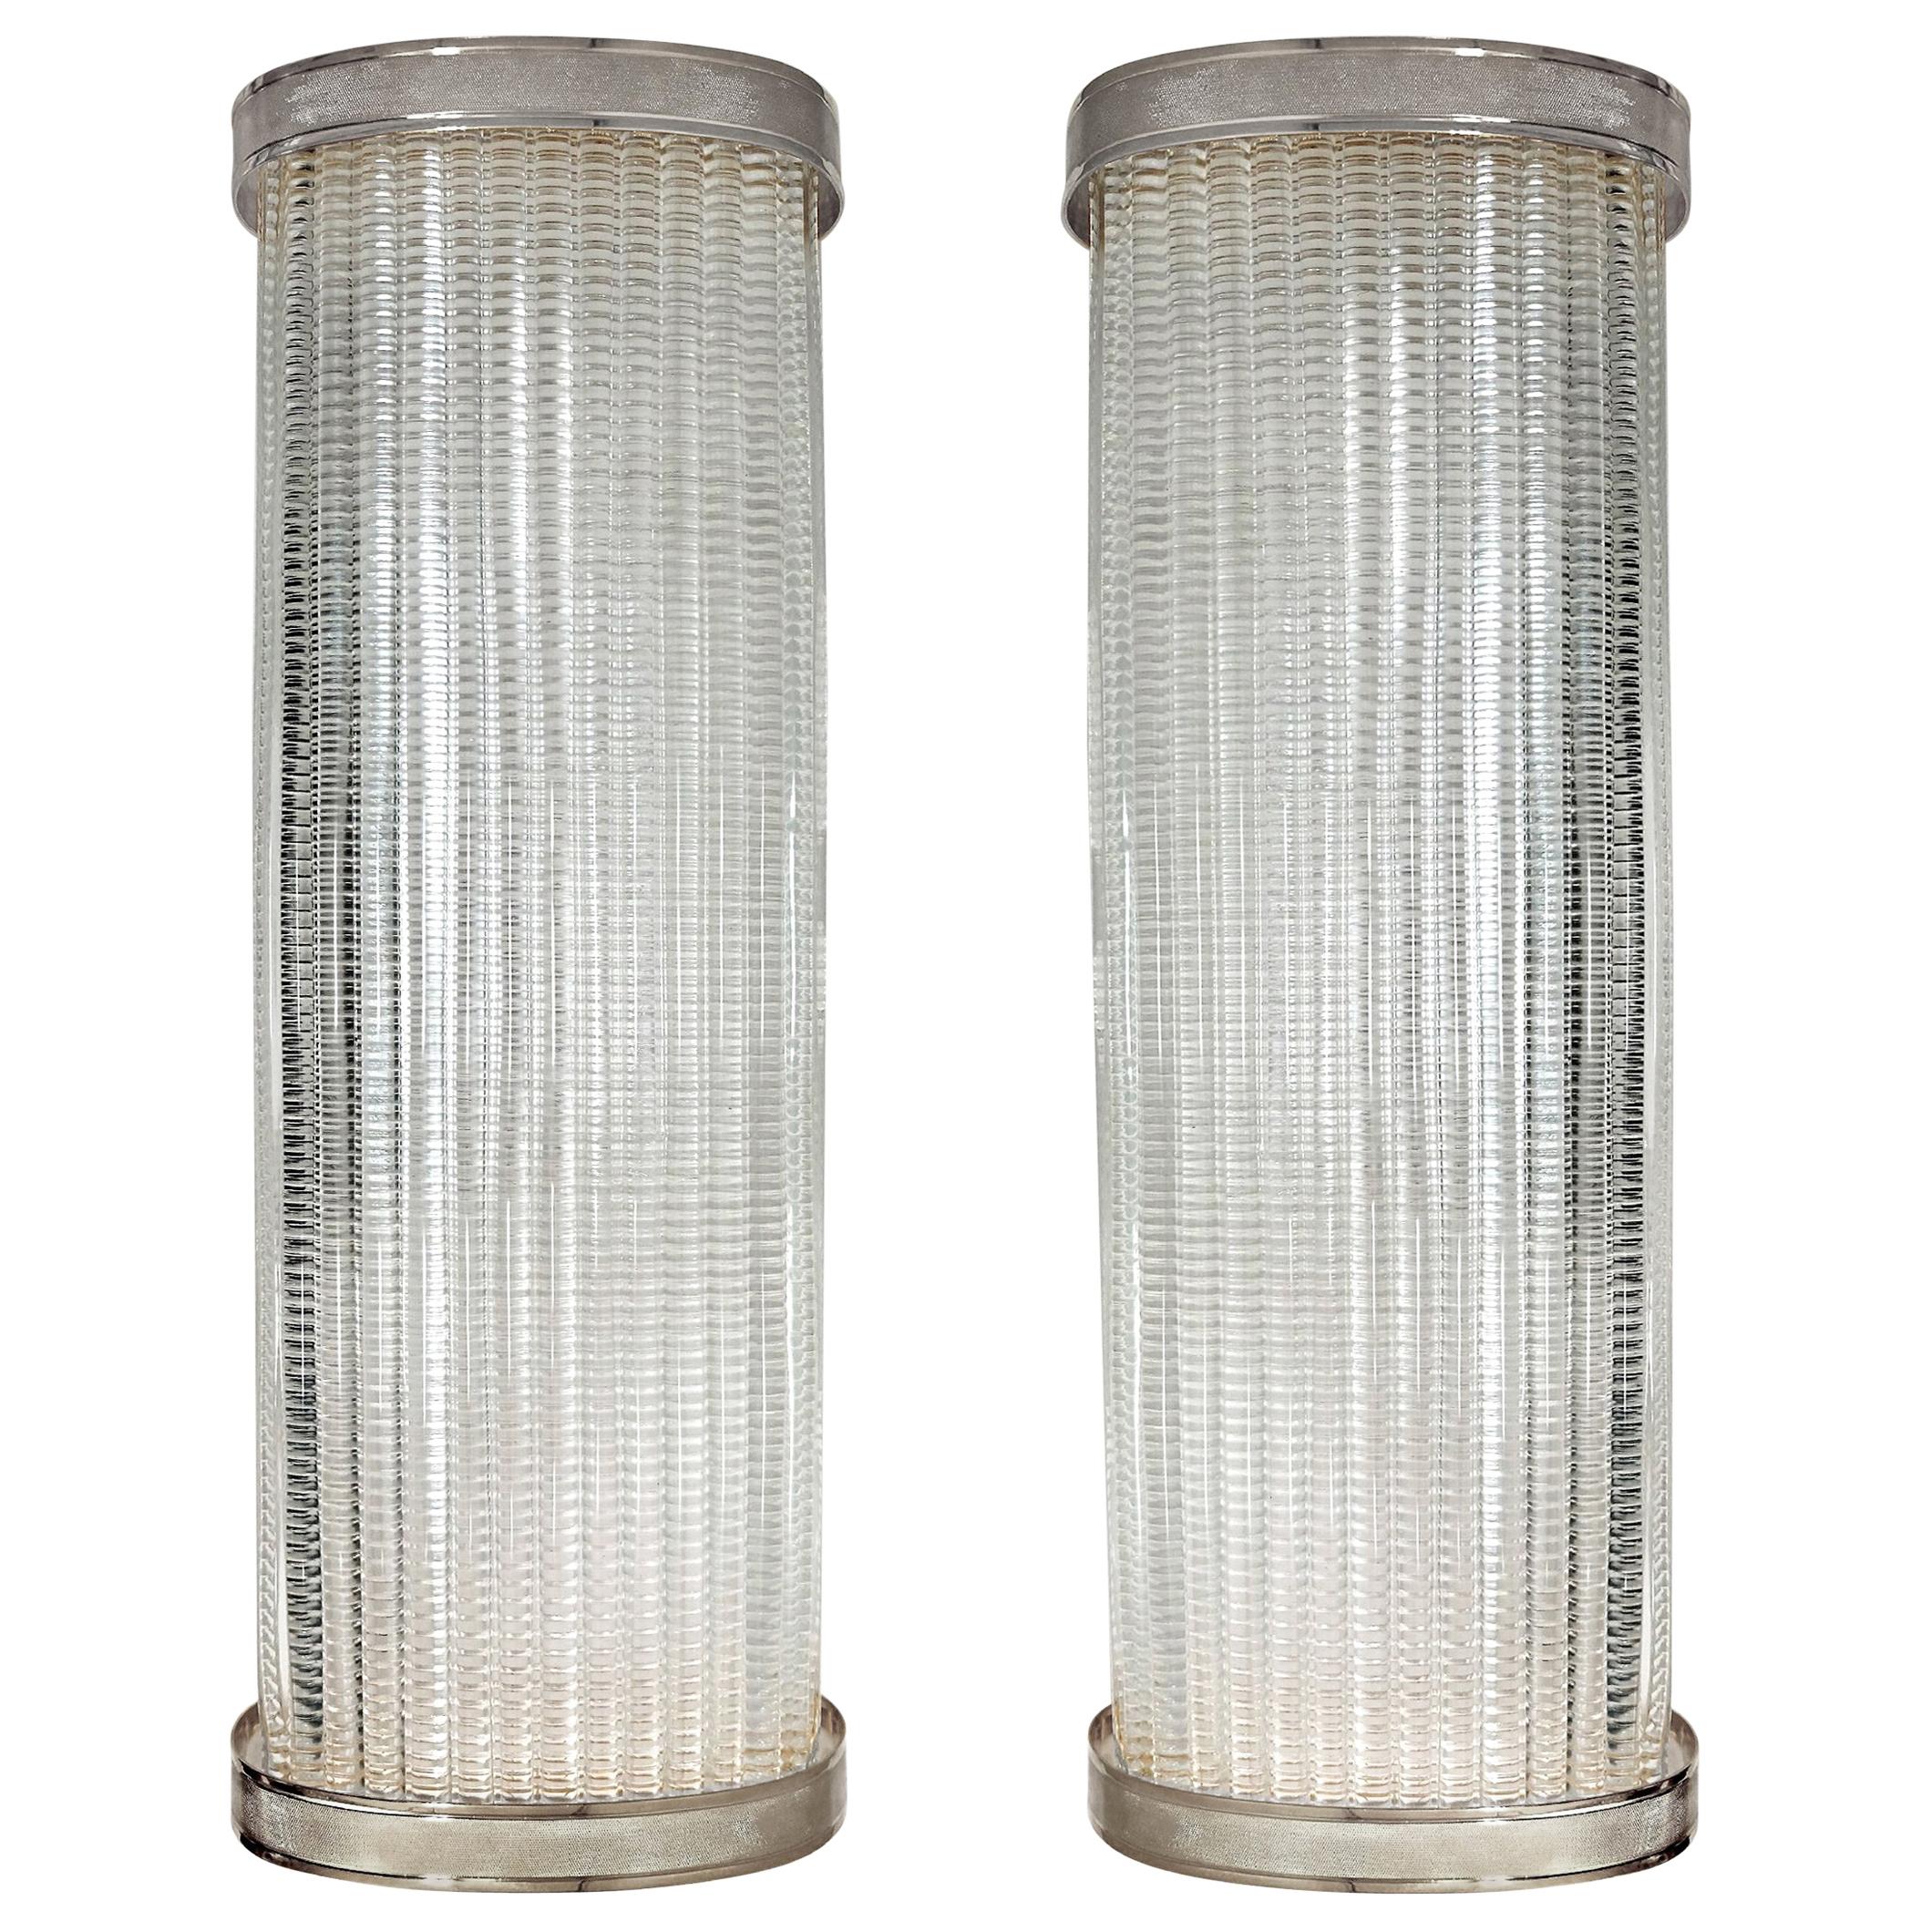 Overscale Laudarte Srl, Italy,  Murano Glass Sconces with Nickel Finish, Pair For Sale